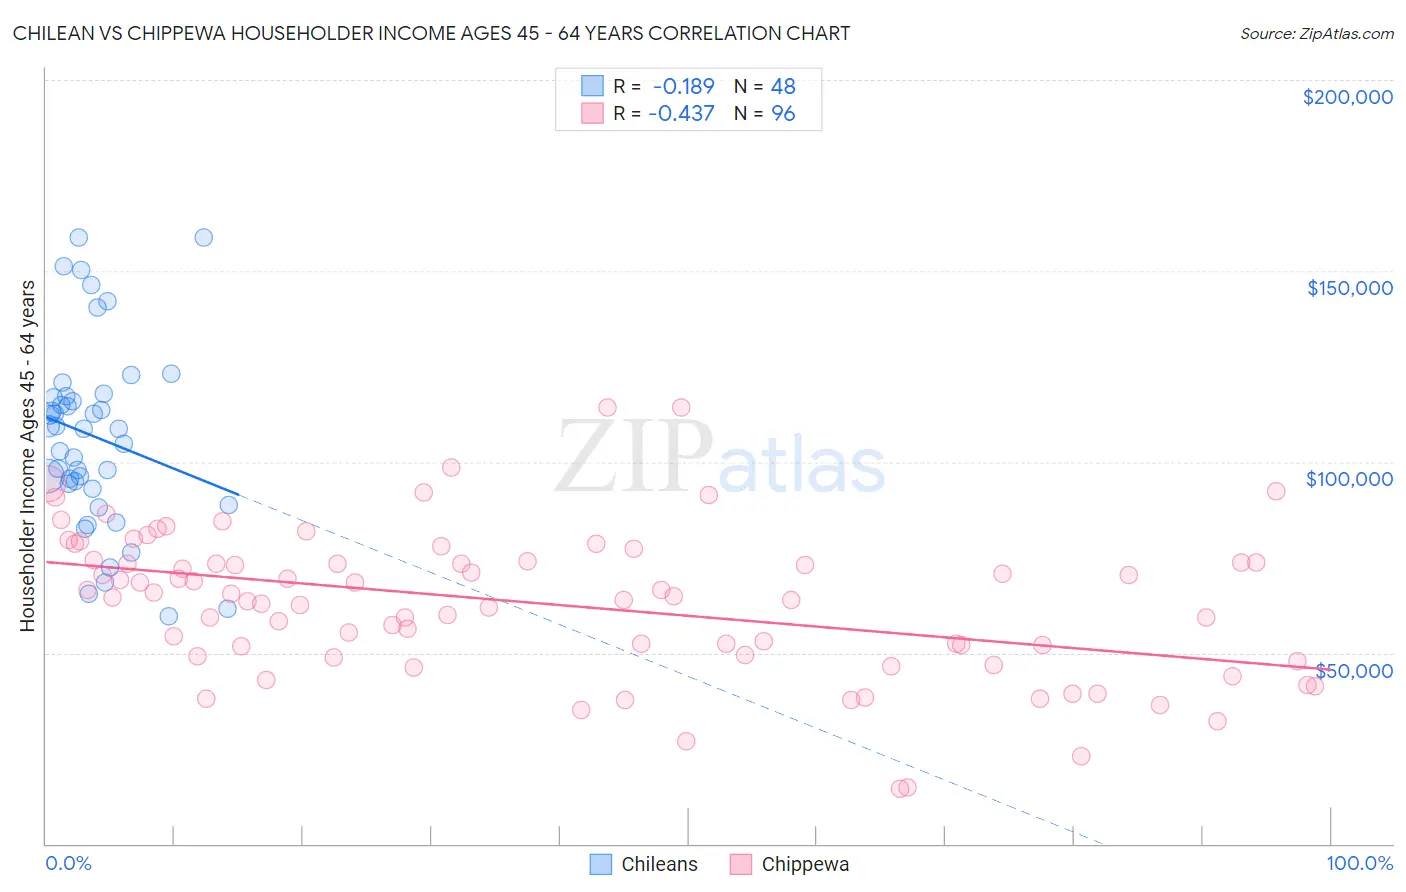 Chilean vs Chippewa Householder Income Ages 45 - 64 years